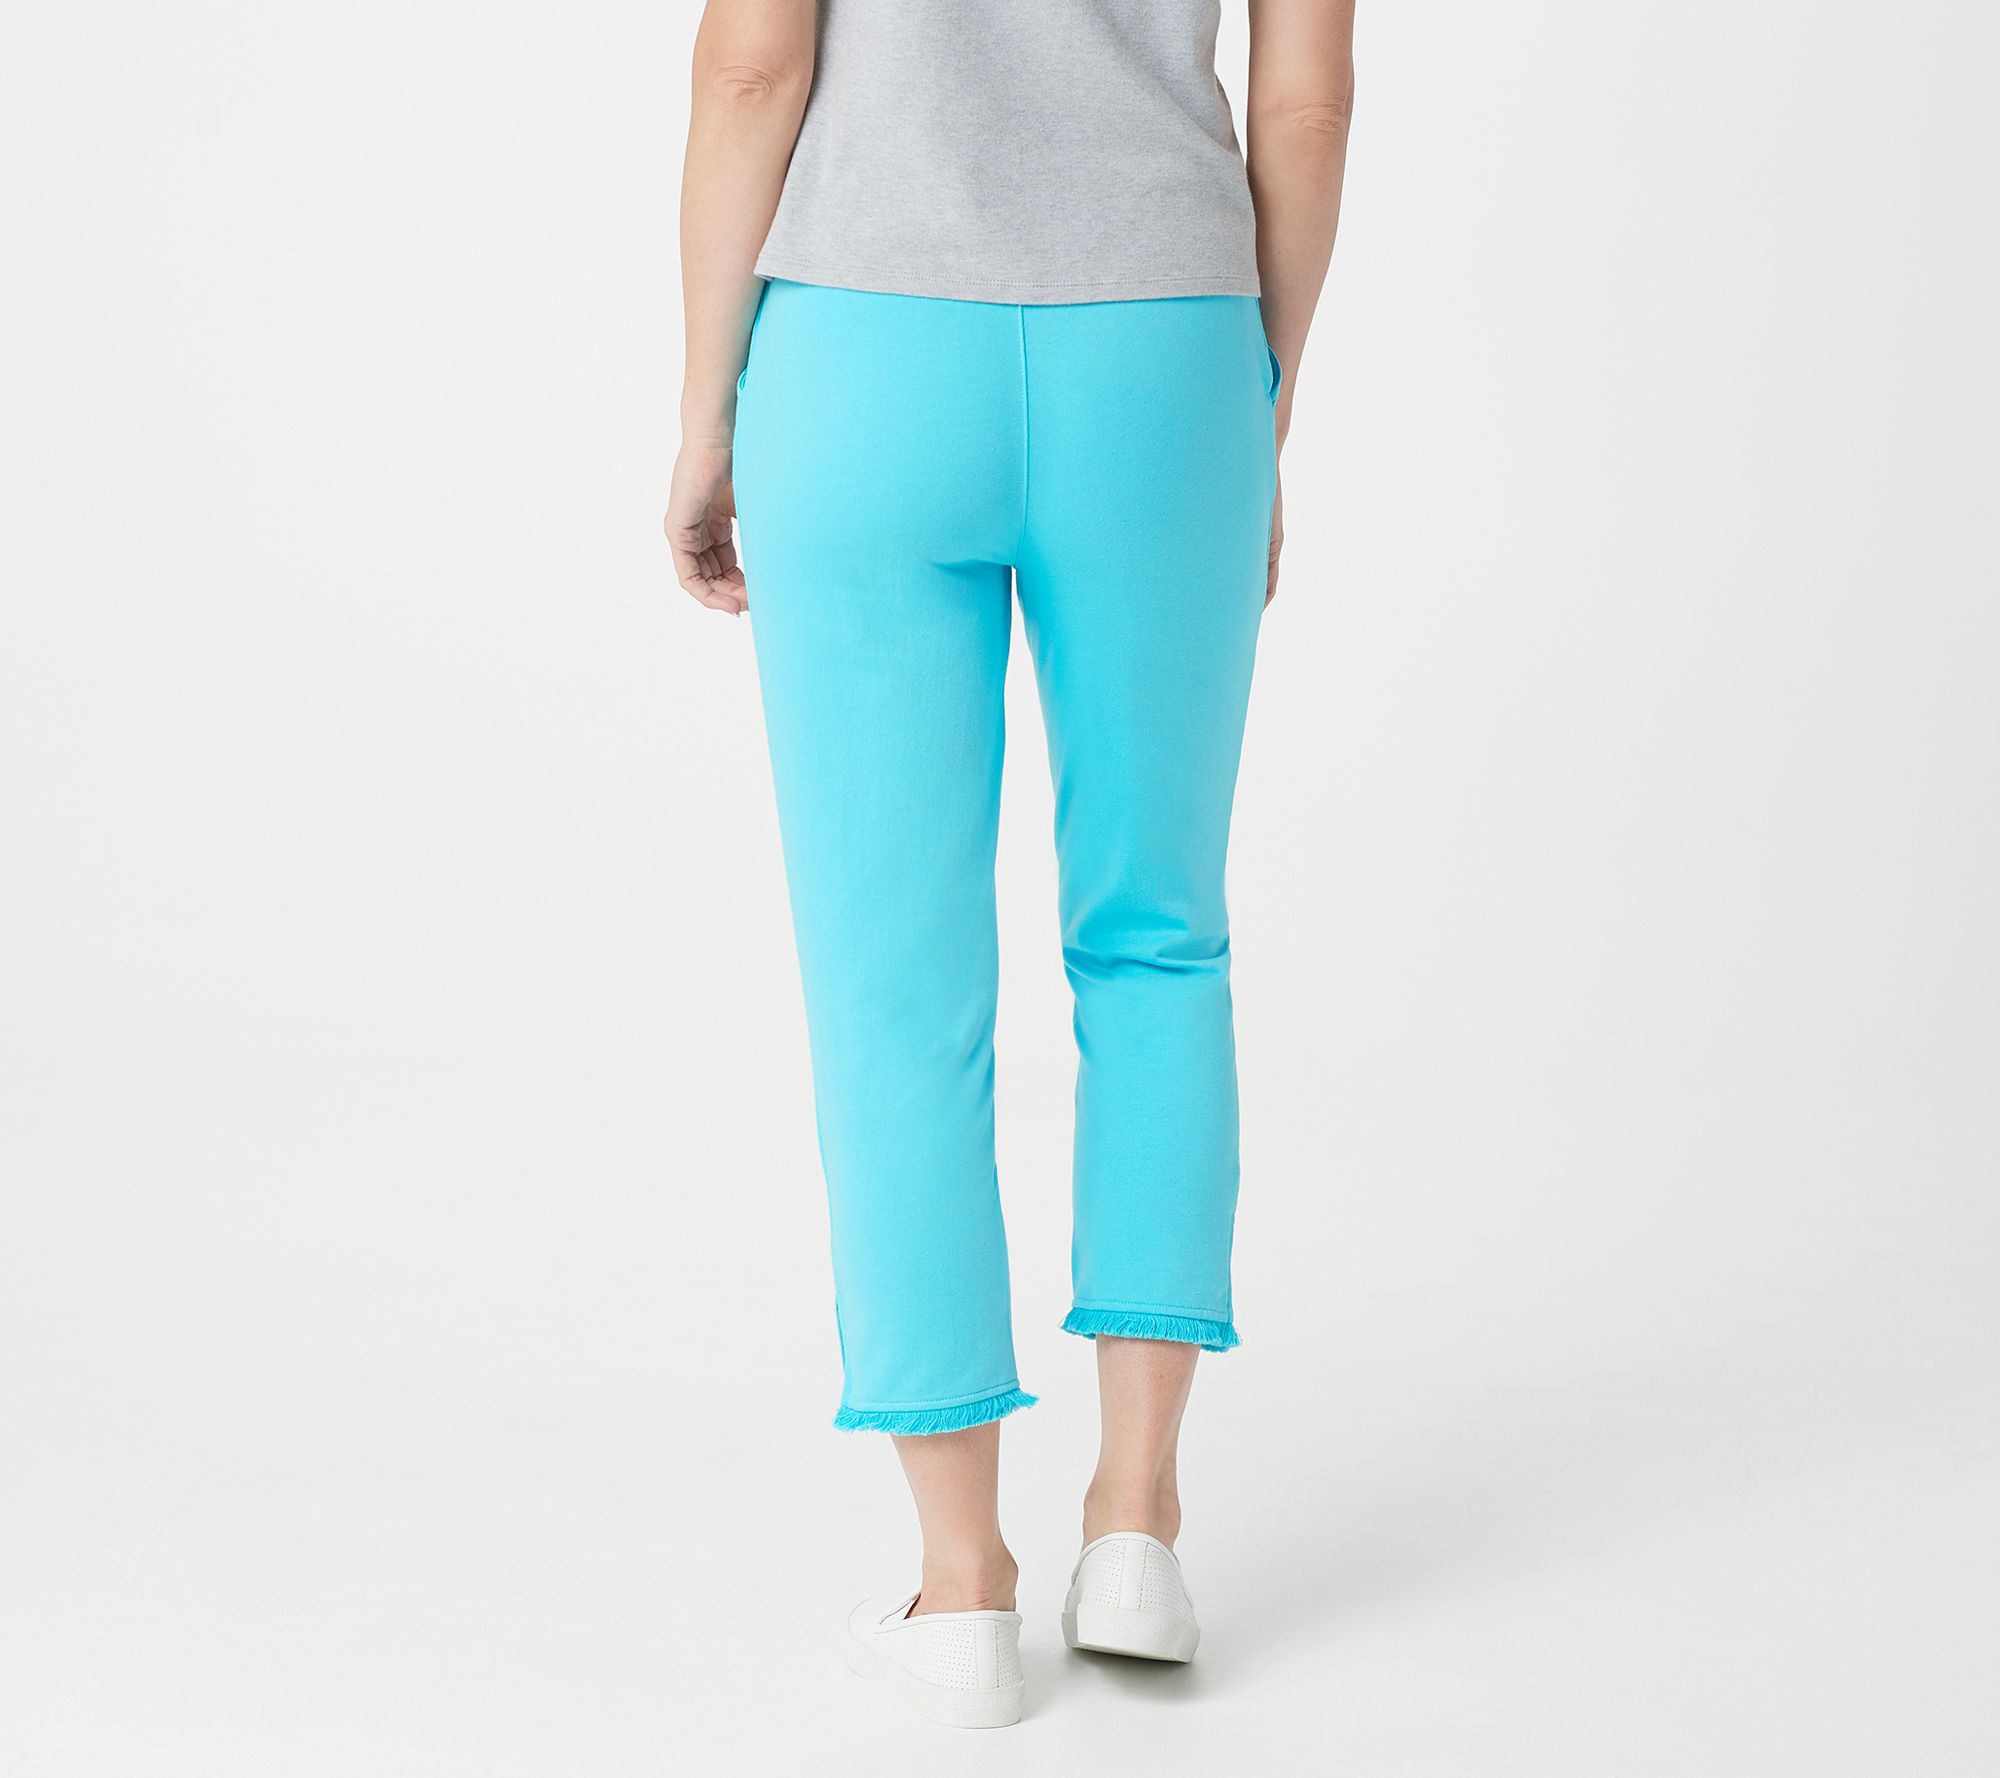 Quacker Factory French Terry Crop Pants with Fringe Detail - QVC.com